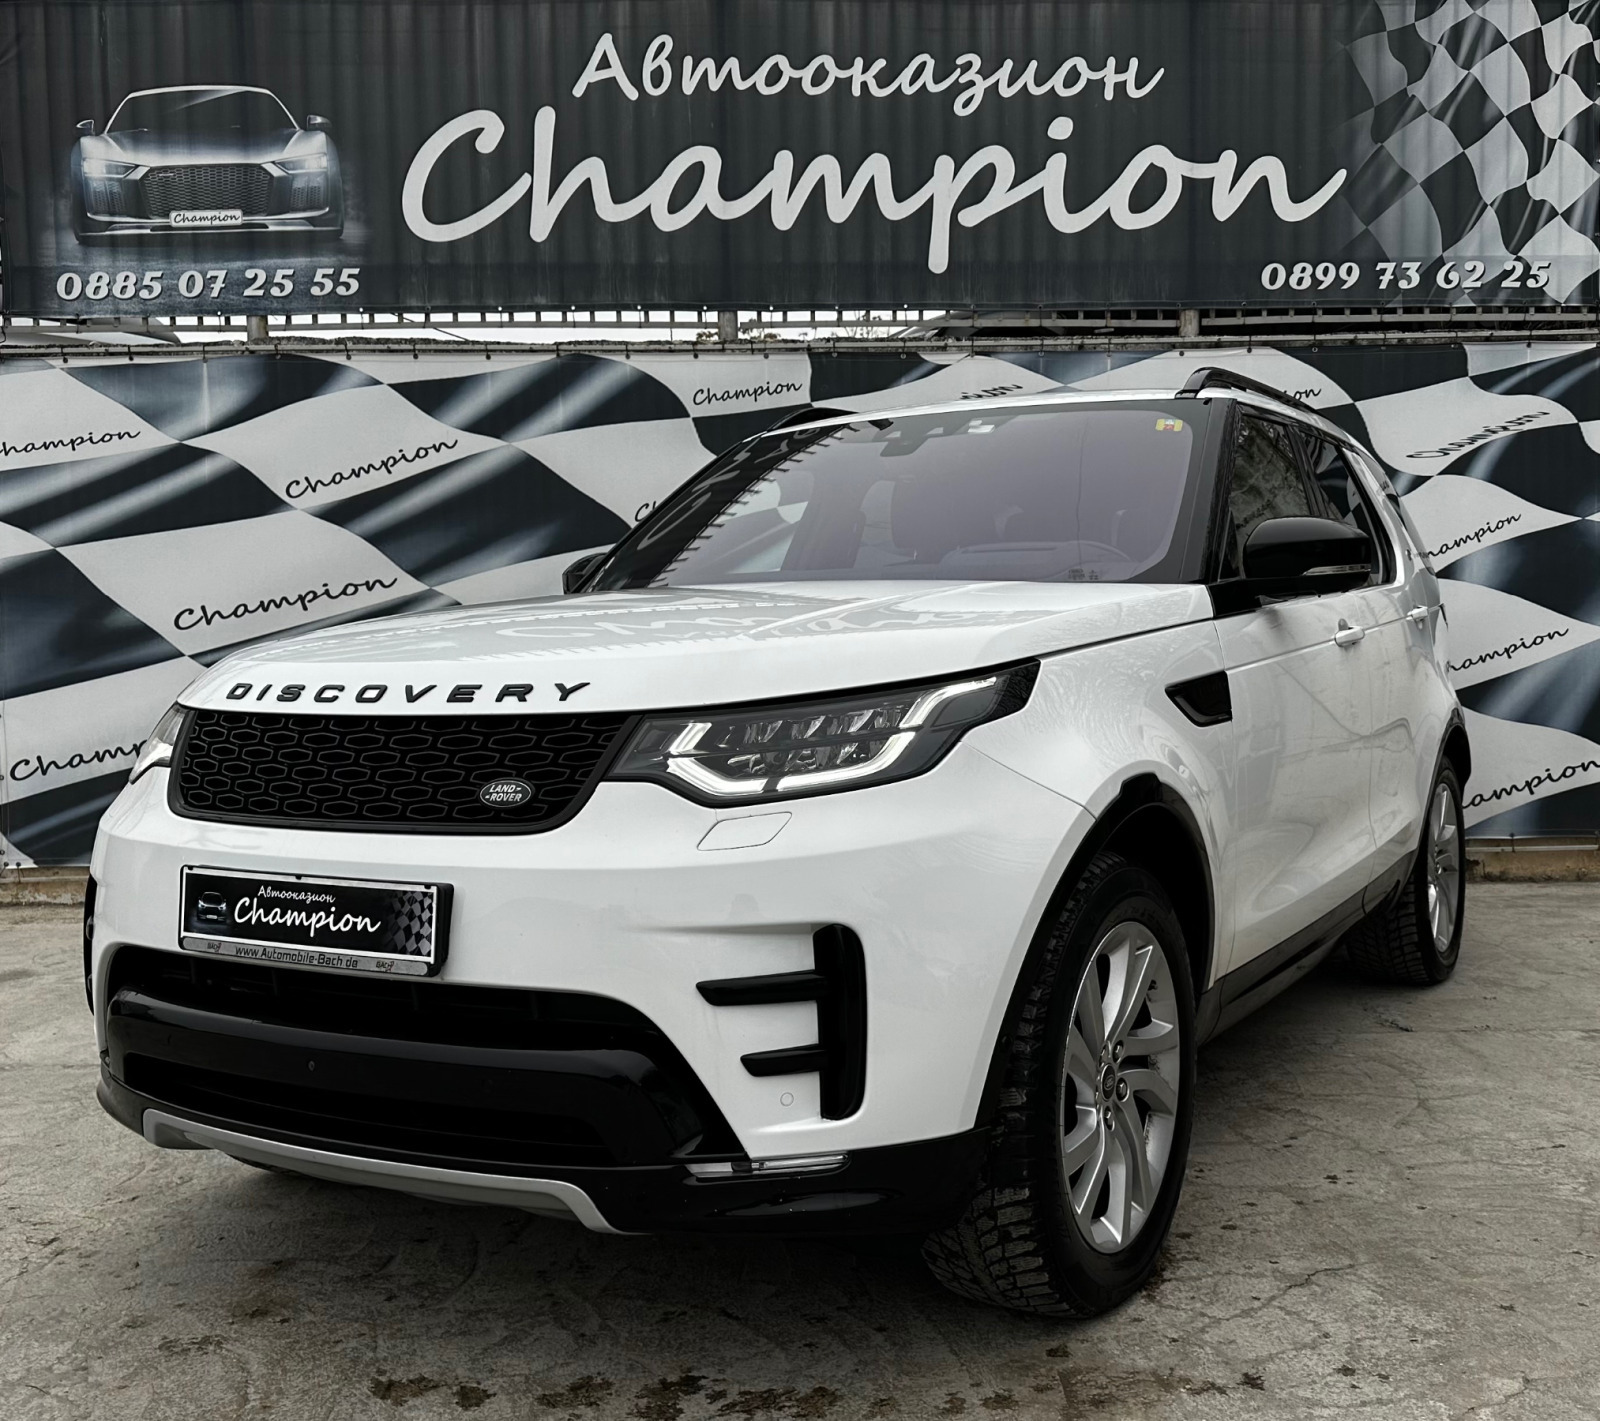 Land Rover Discovery HSE-3.0TD6 - изображение 1